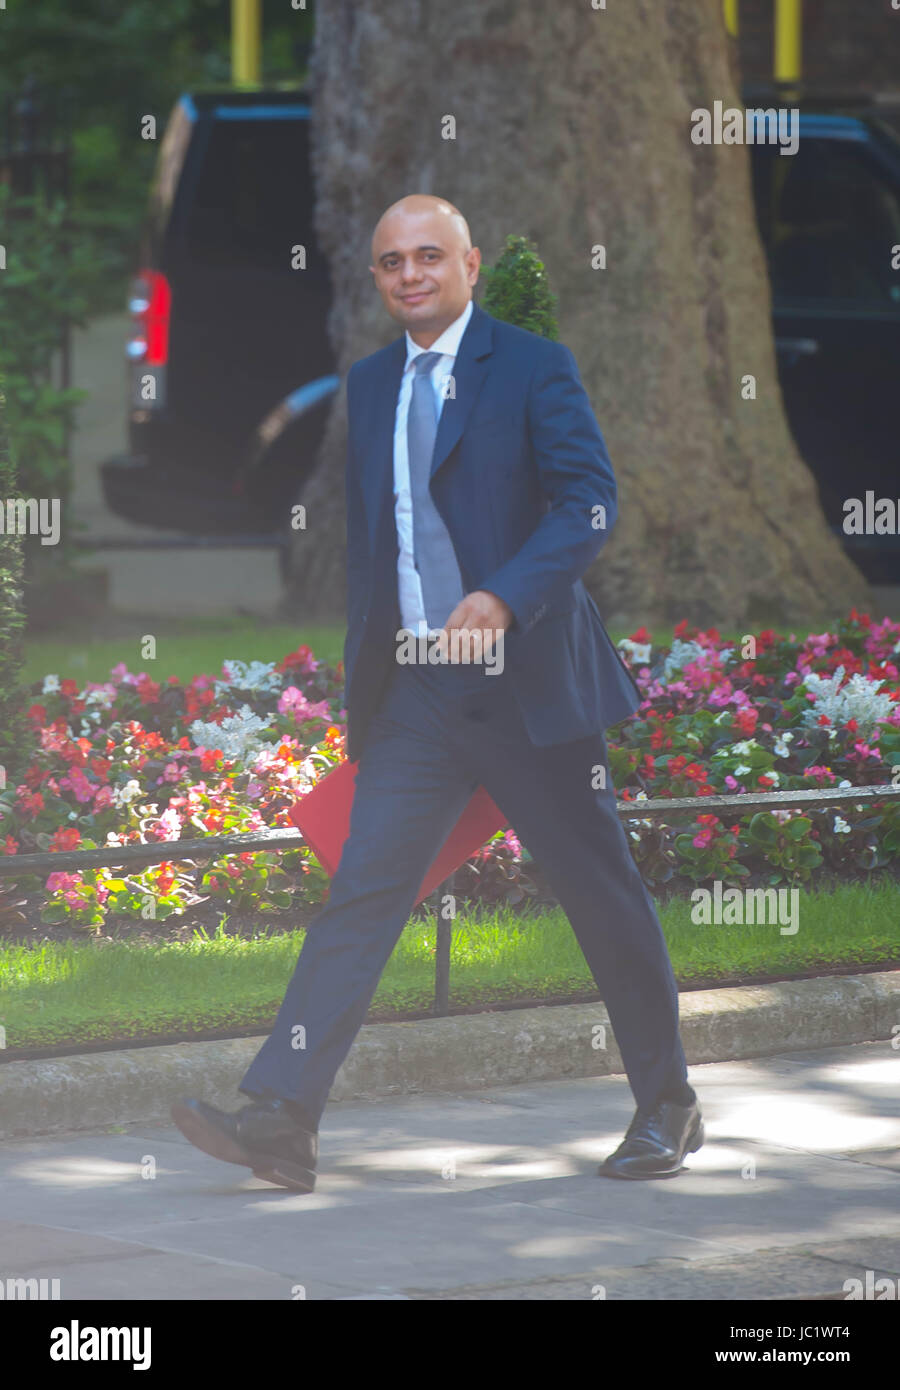 London, UK. 13th June, 2017. Secretary of State for Communities and Local Government Sajid Javid arrives at Downing Street. Prime Minister will hosts leader of the DUP for talks, as May seeks to negotiate a deal for Unionist support for a Conservative minority government. Theresa May announced following last week's General Election that she would be seeking to form a government alongside the DUP after the Conservative Party failed to secure an overall majority in the House of Commons. Credit: Michael Tubi/Alamy Live News Stock Photo